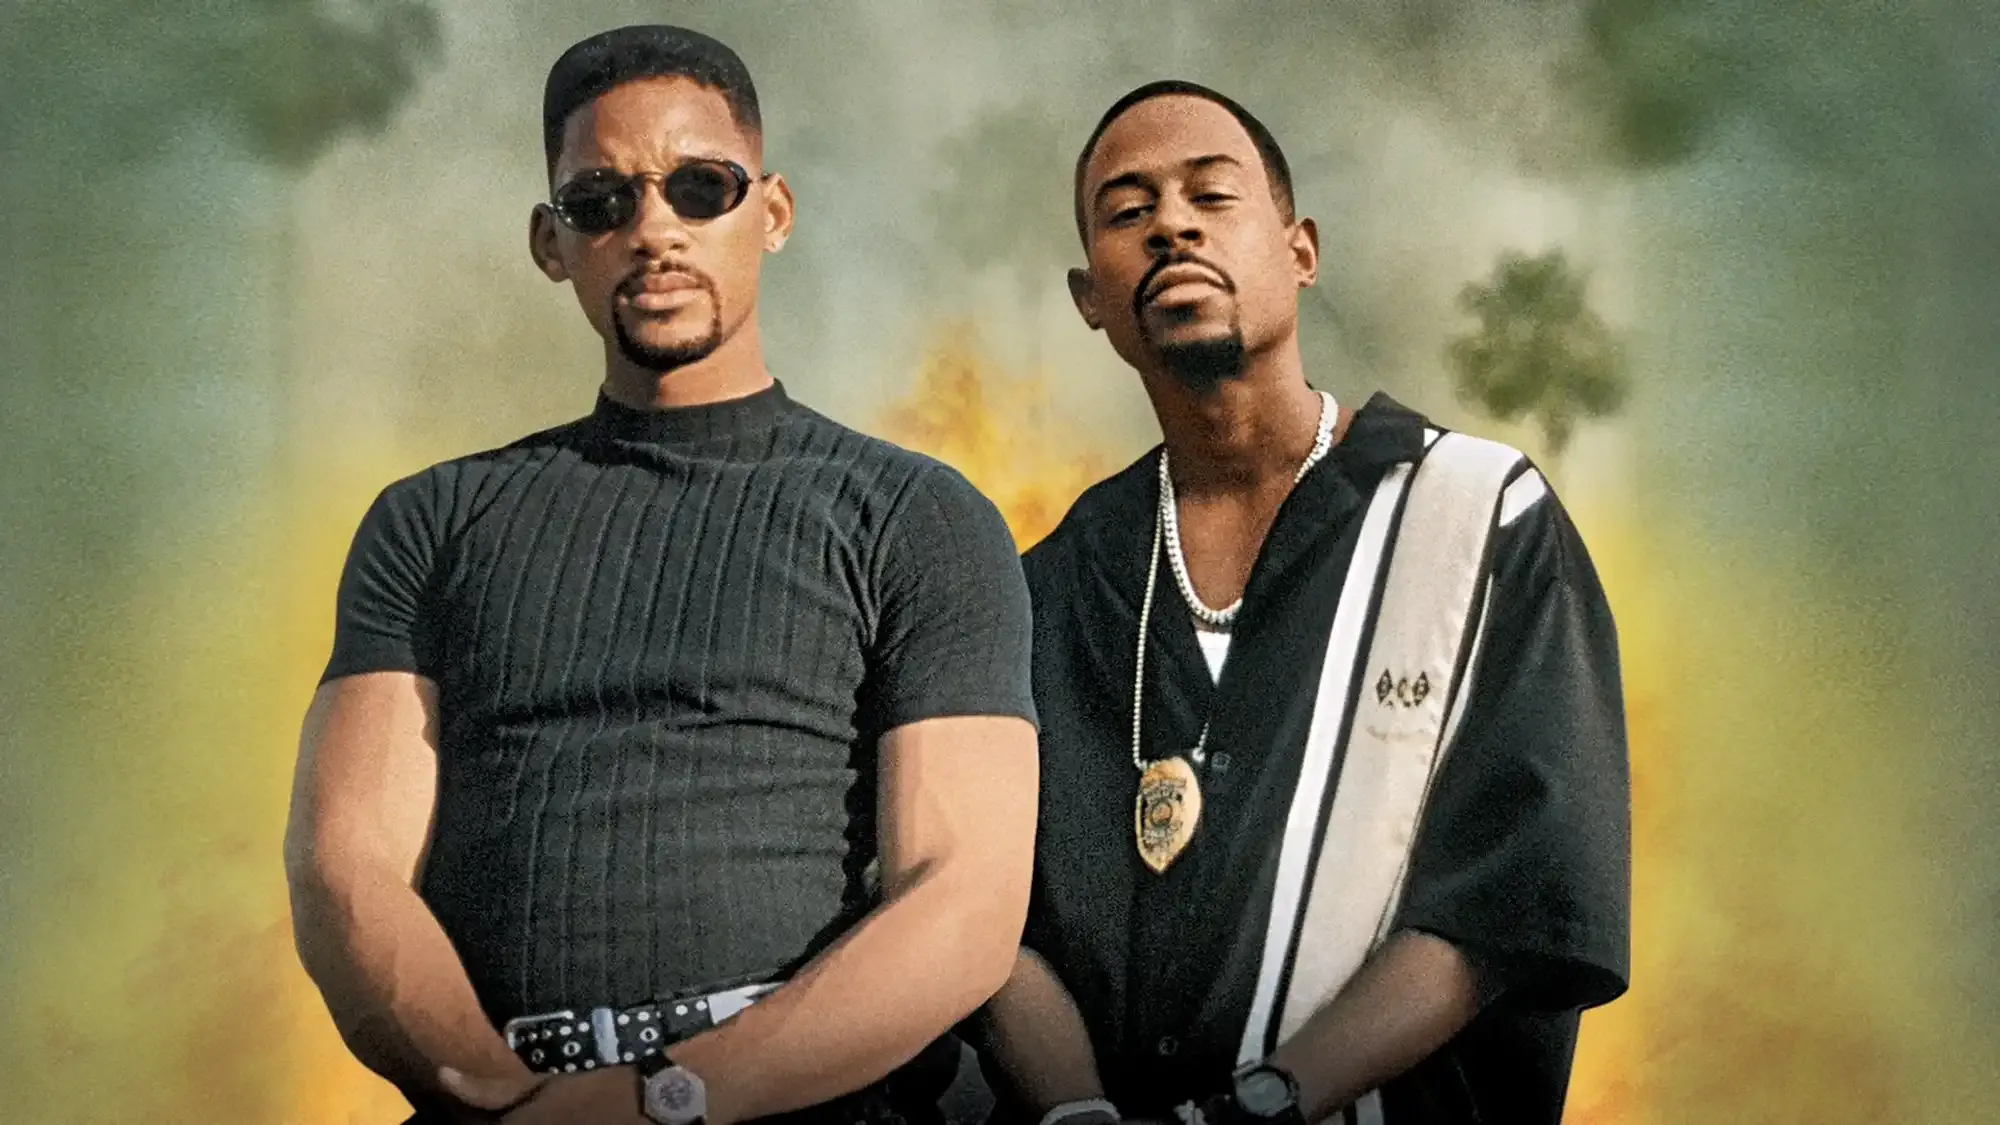 Bad Boys movie review